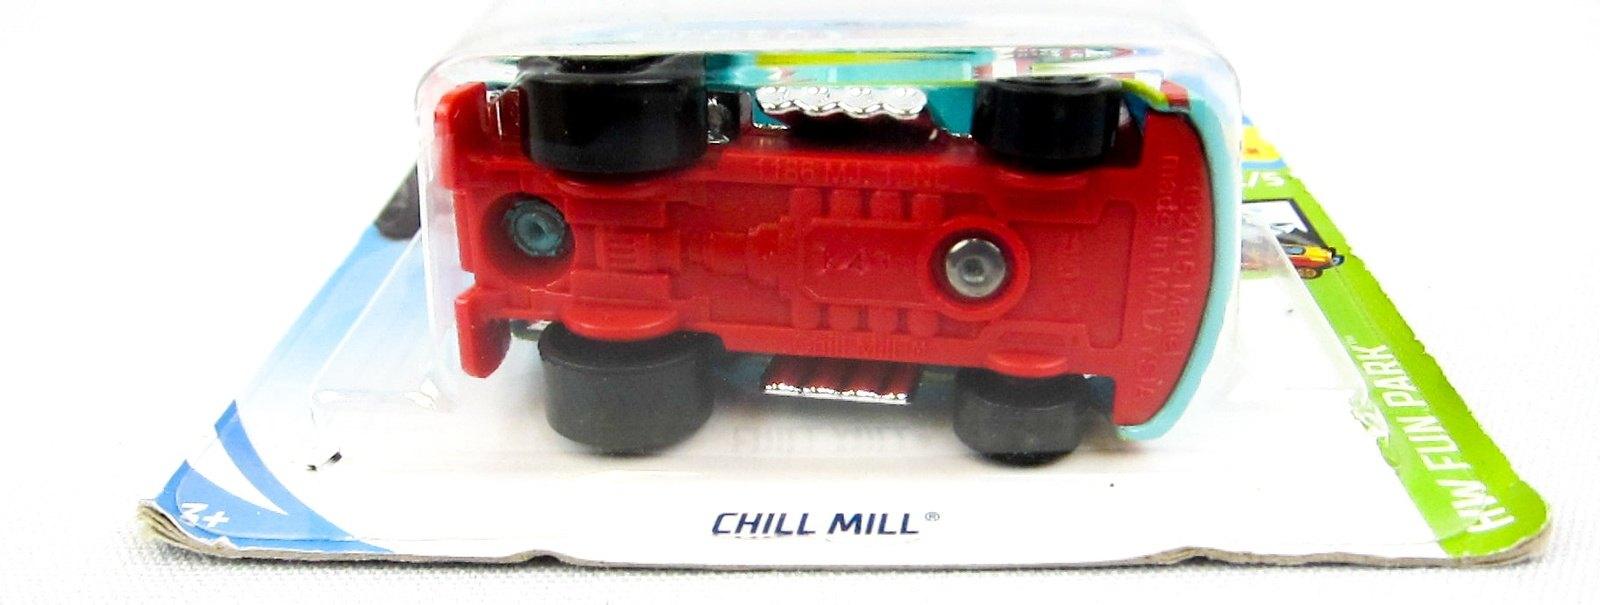 Hot Wheels RRRoadster 234 Quick n' Sik 235 Chill Mill 94 Lot of 5 NEW 5